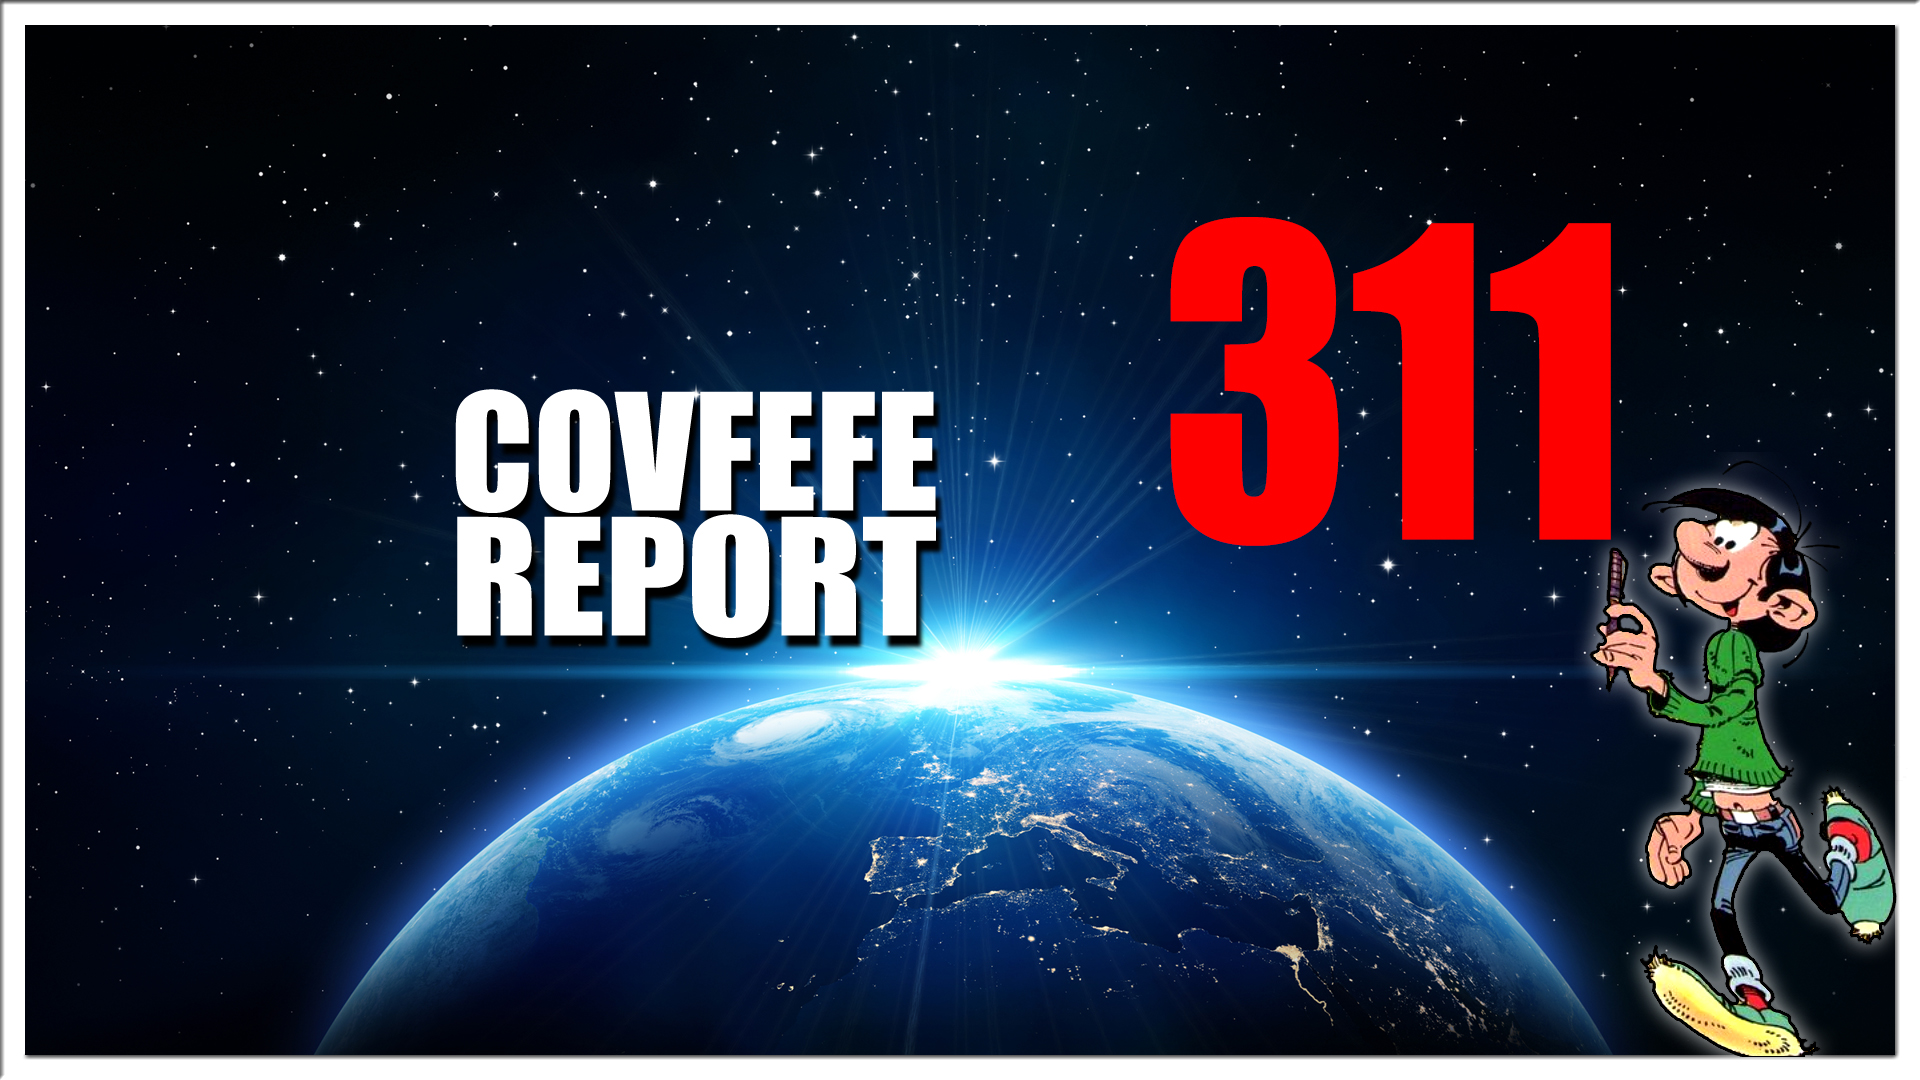 Covfefe Report 311. Covfefe, They can no longer hide in the shadows, Buckle up, Paniek alom